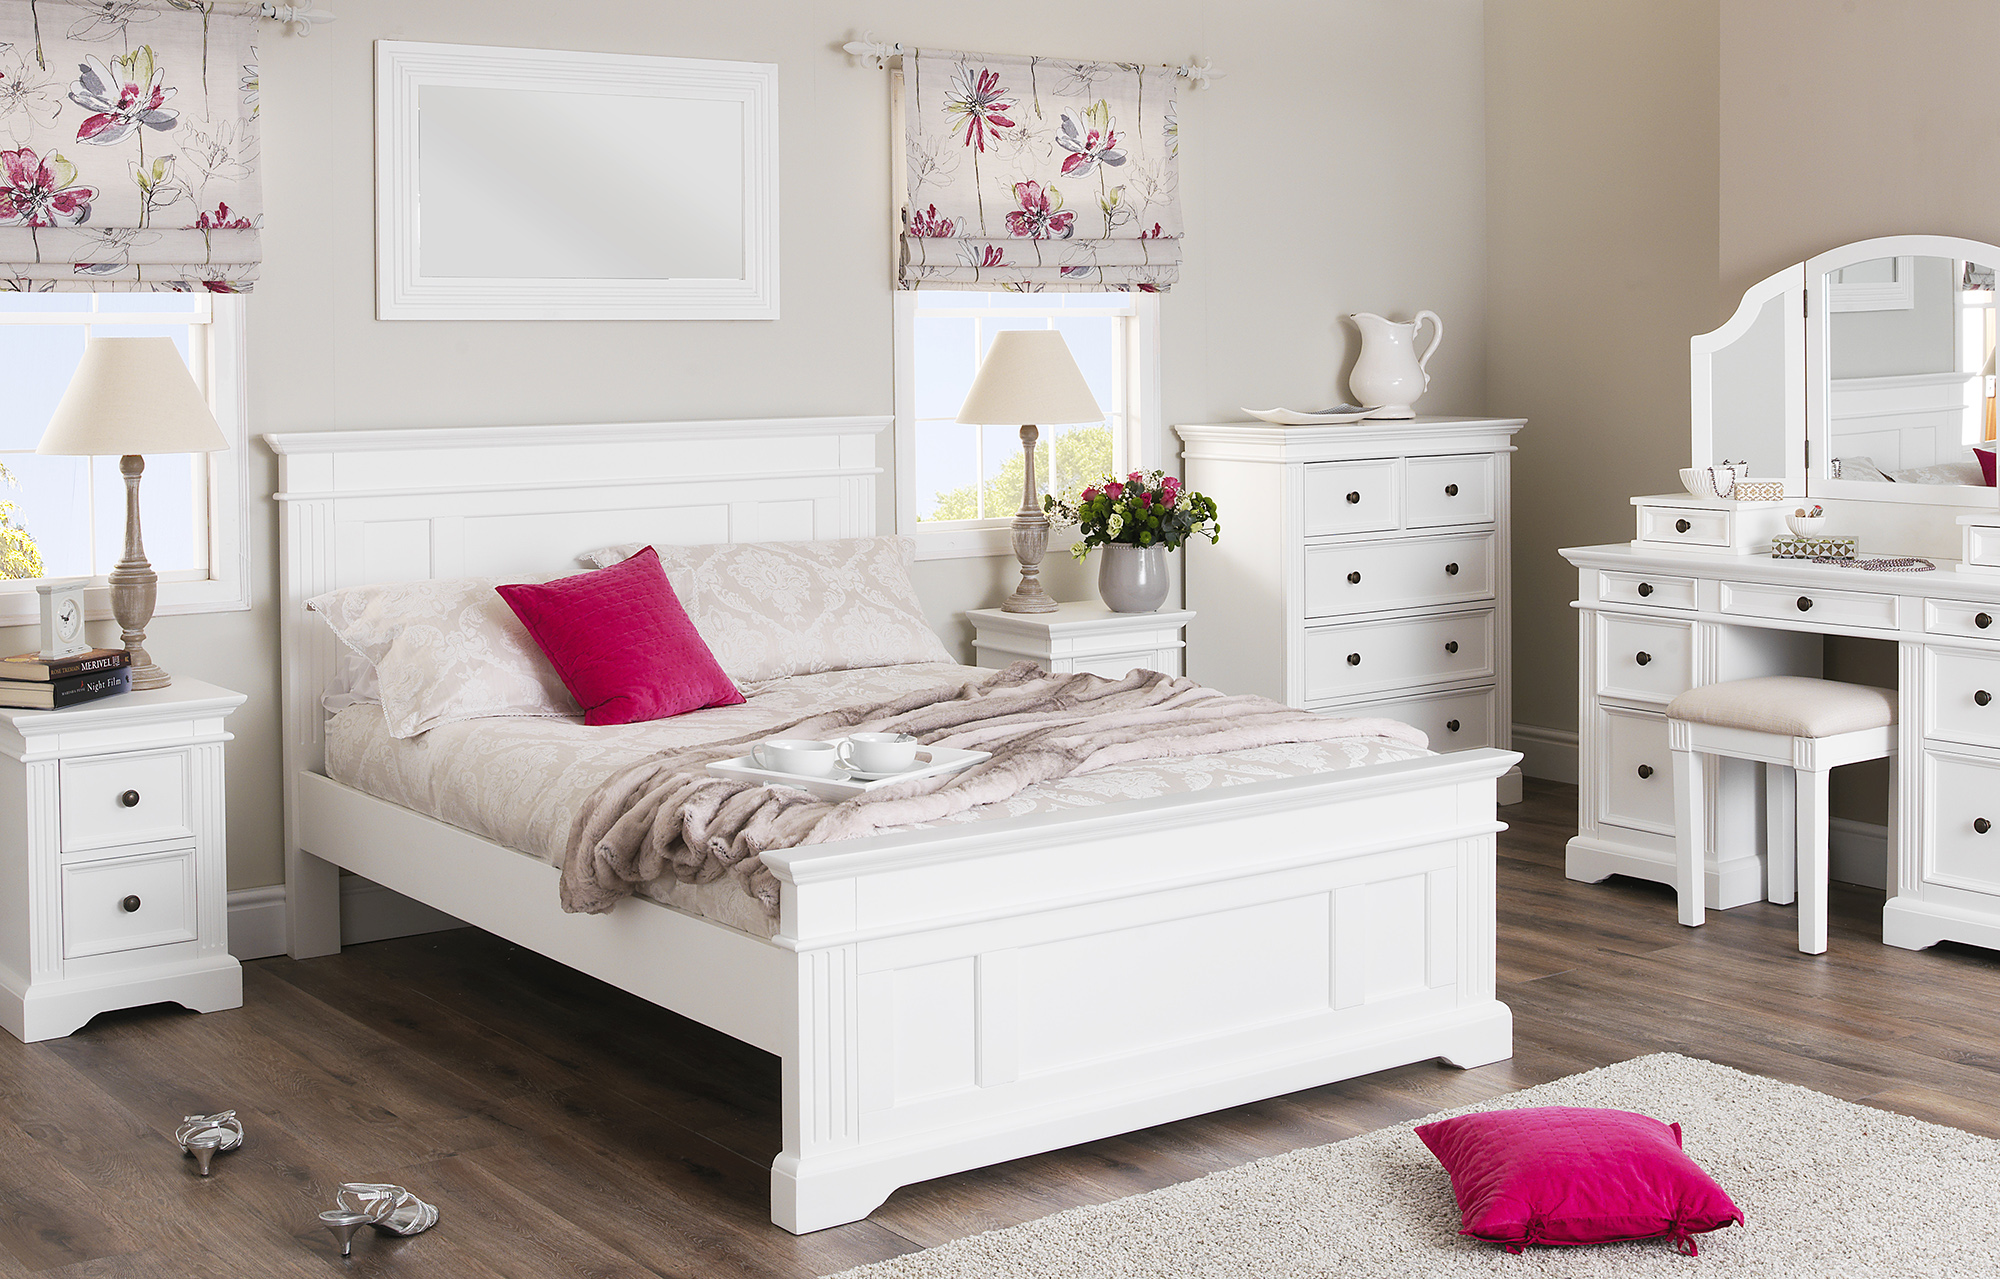 Designed shabby chic bedroom furniture sets gives simplicity and elegant  look